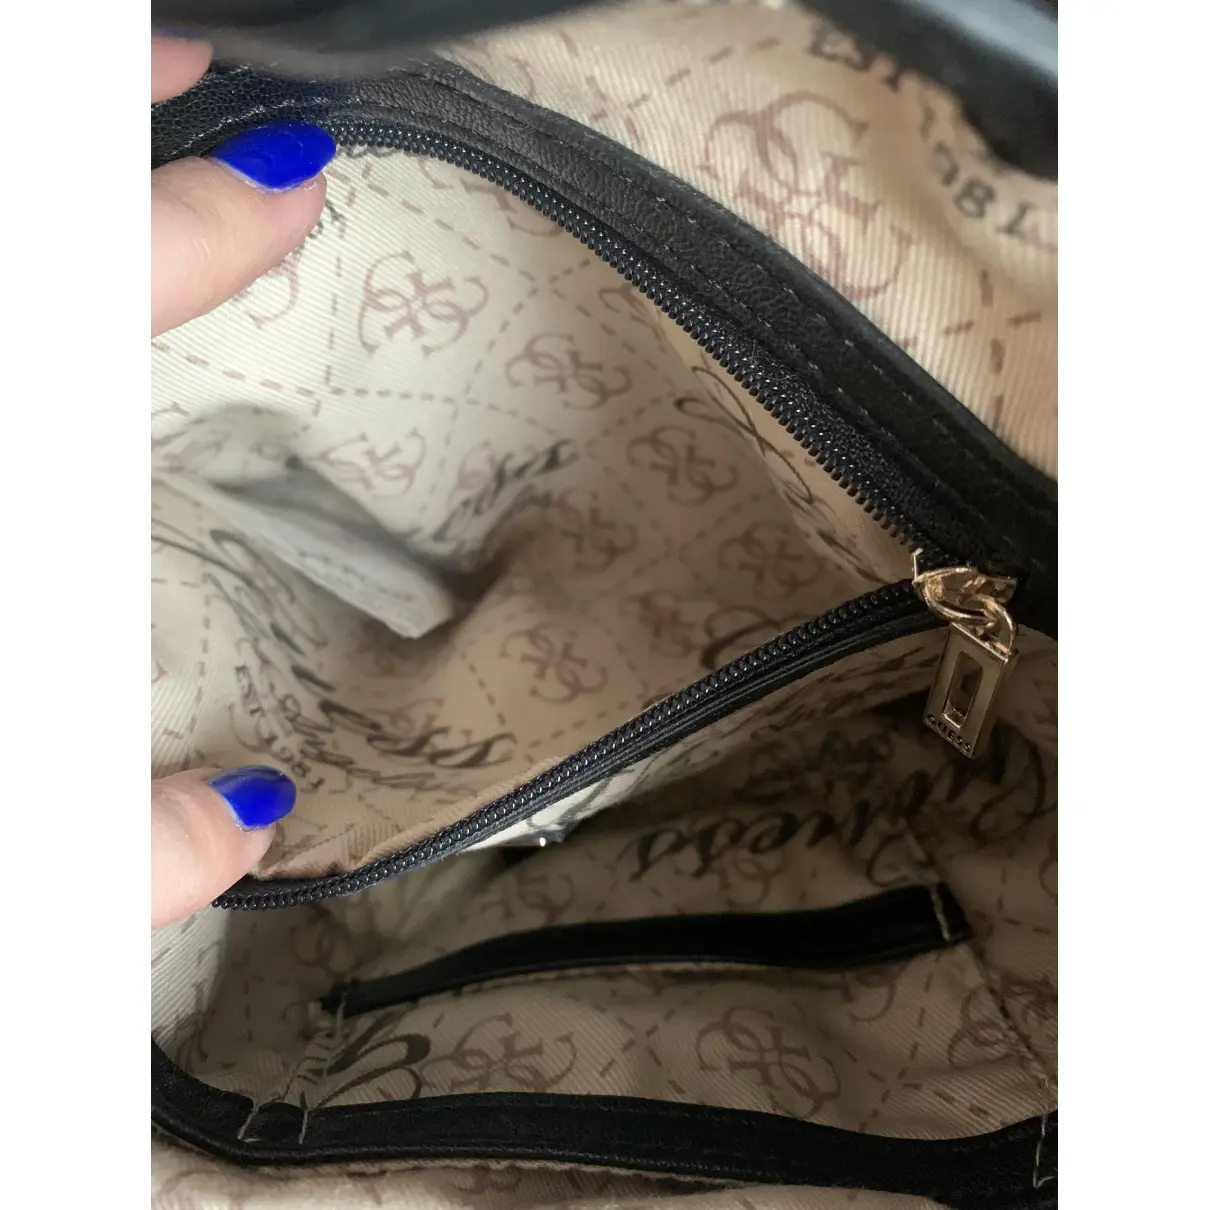 Leather crossbody bag GUESS